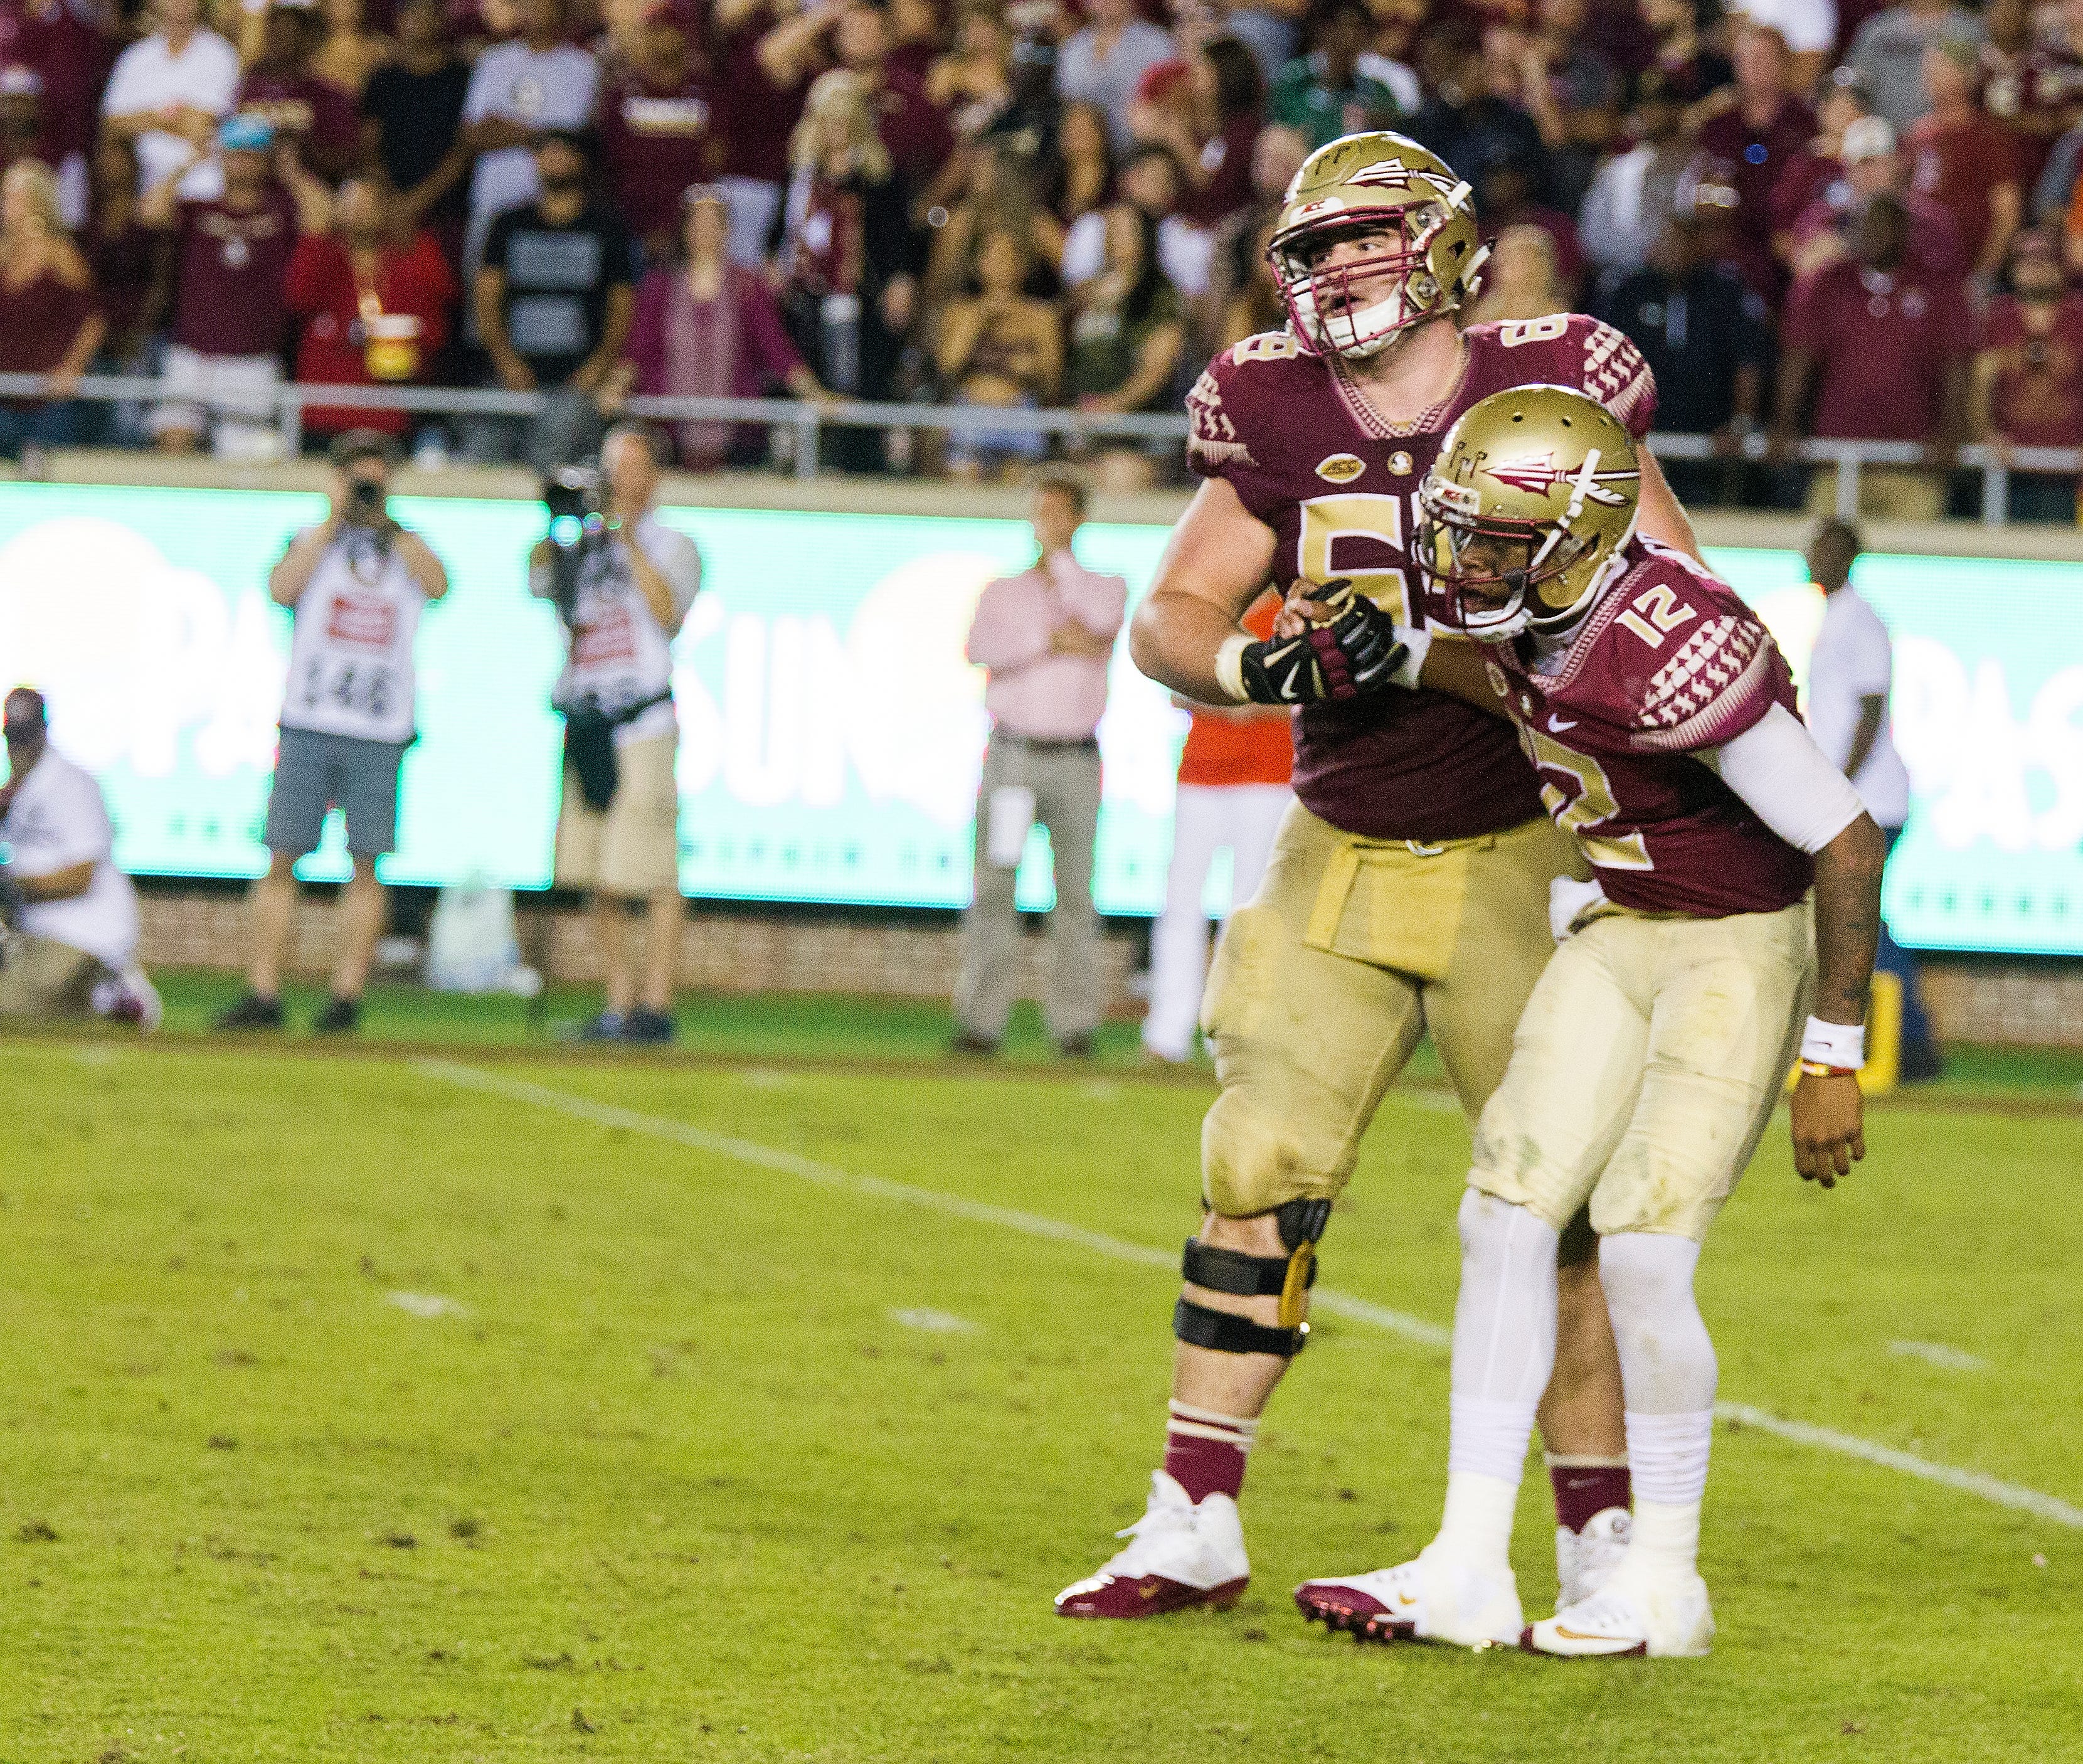 Florida State offensive lineman Landon Dickerson helps quarterback Deondre Francois up aft4er being hit by the Clemson defense in the second half of an NCAA college football game in Tallahassee, Fla., Saturday, Oct. 29, 2016. Clemson defeated Florida State 37-34. (AP Photo/Mark Wallheiser)